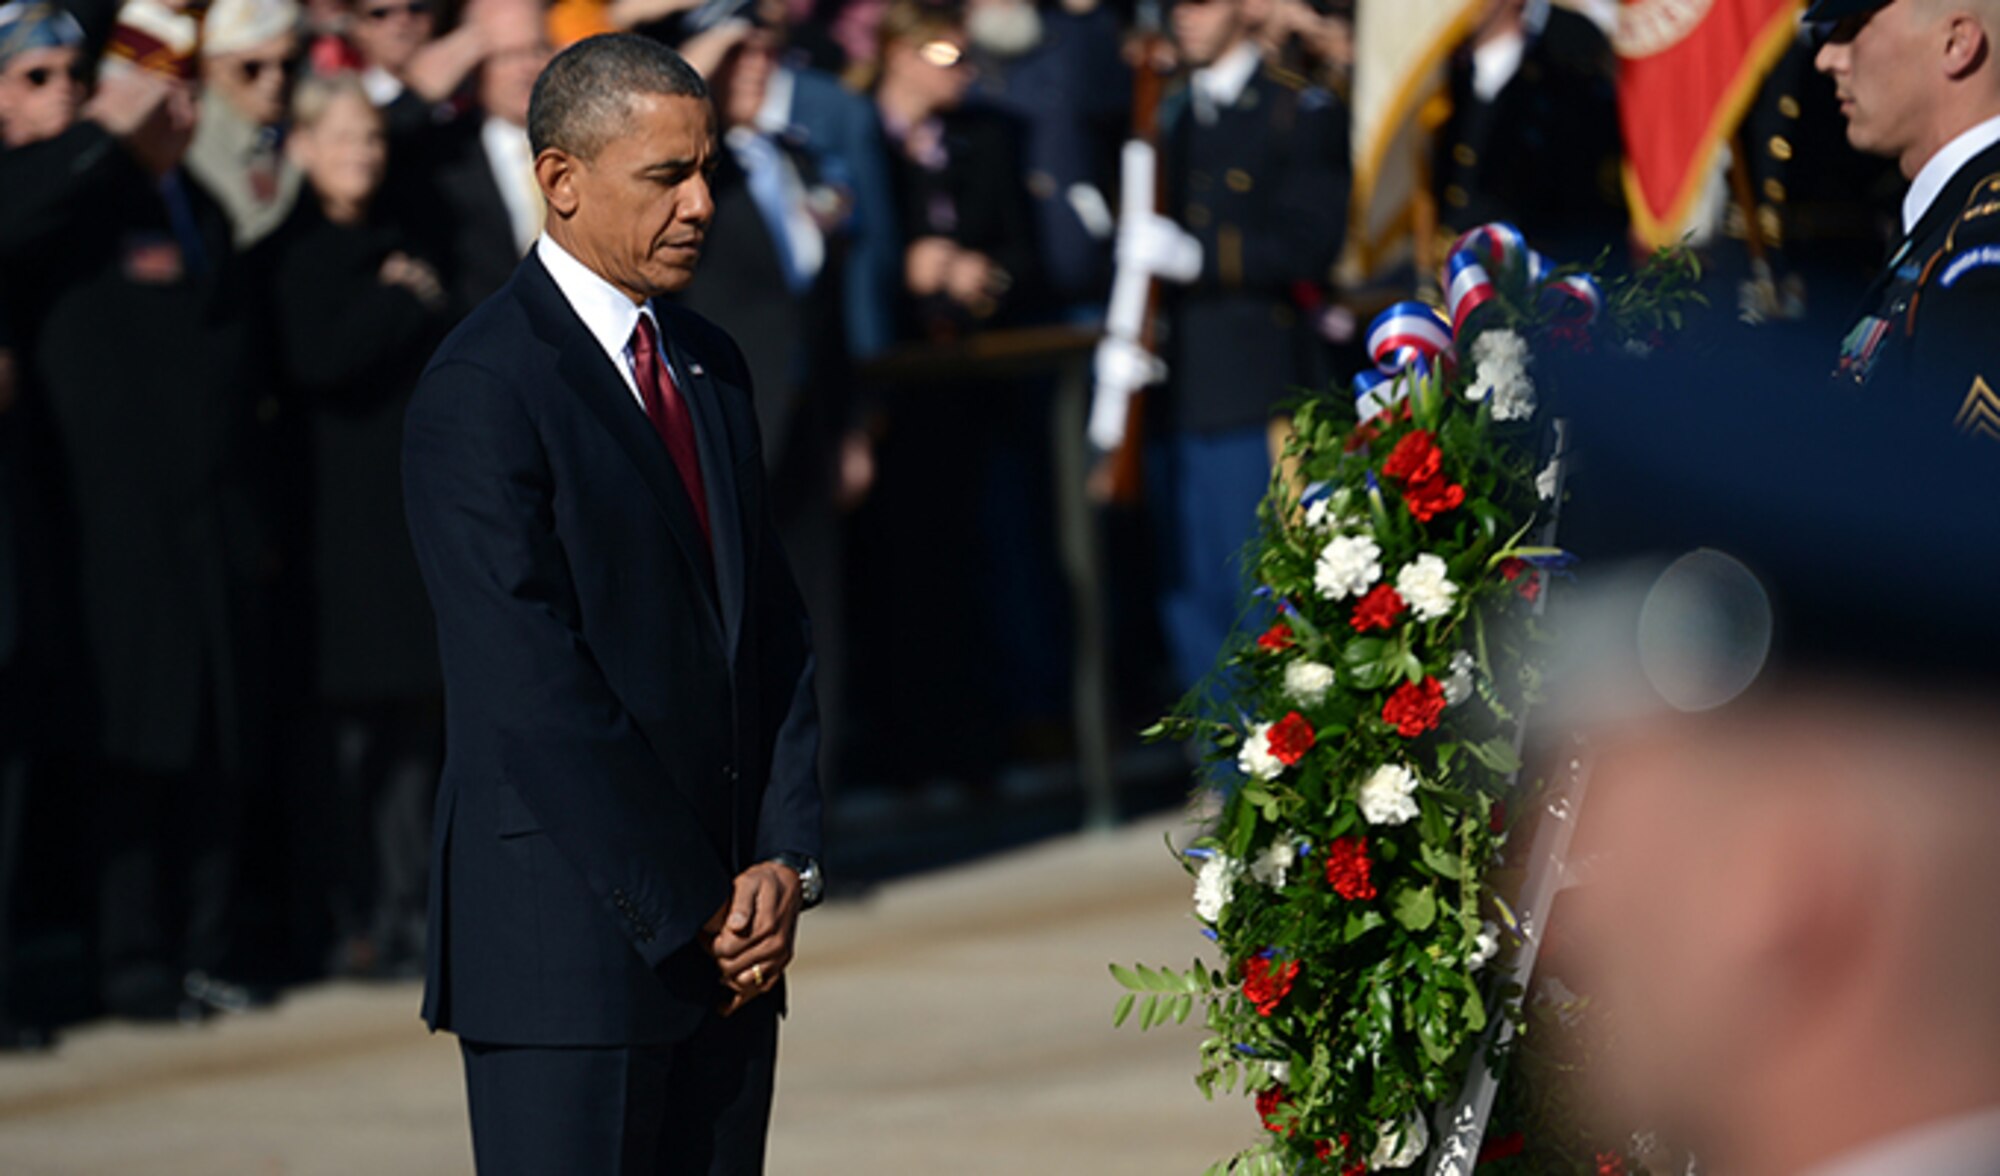 President Barack Obama pauses before a wreath he placed Nov. 11, 2013, at the Tomb of the Unknown Soldier during a Veterans Day ceremony at Arlington National Cemetery in Arlington, Va. Vice President Joe Biden stands behind the president at left. (Department of Defense photo/EJ Hersom)